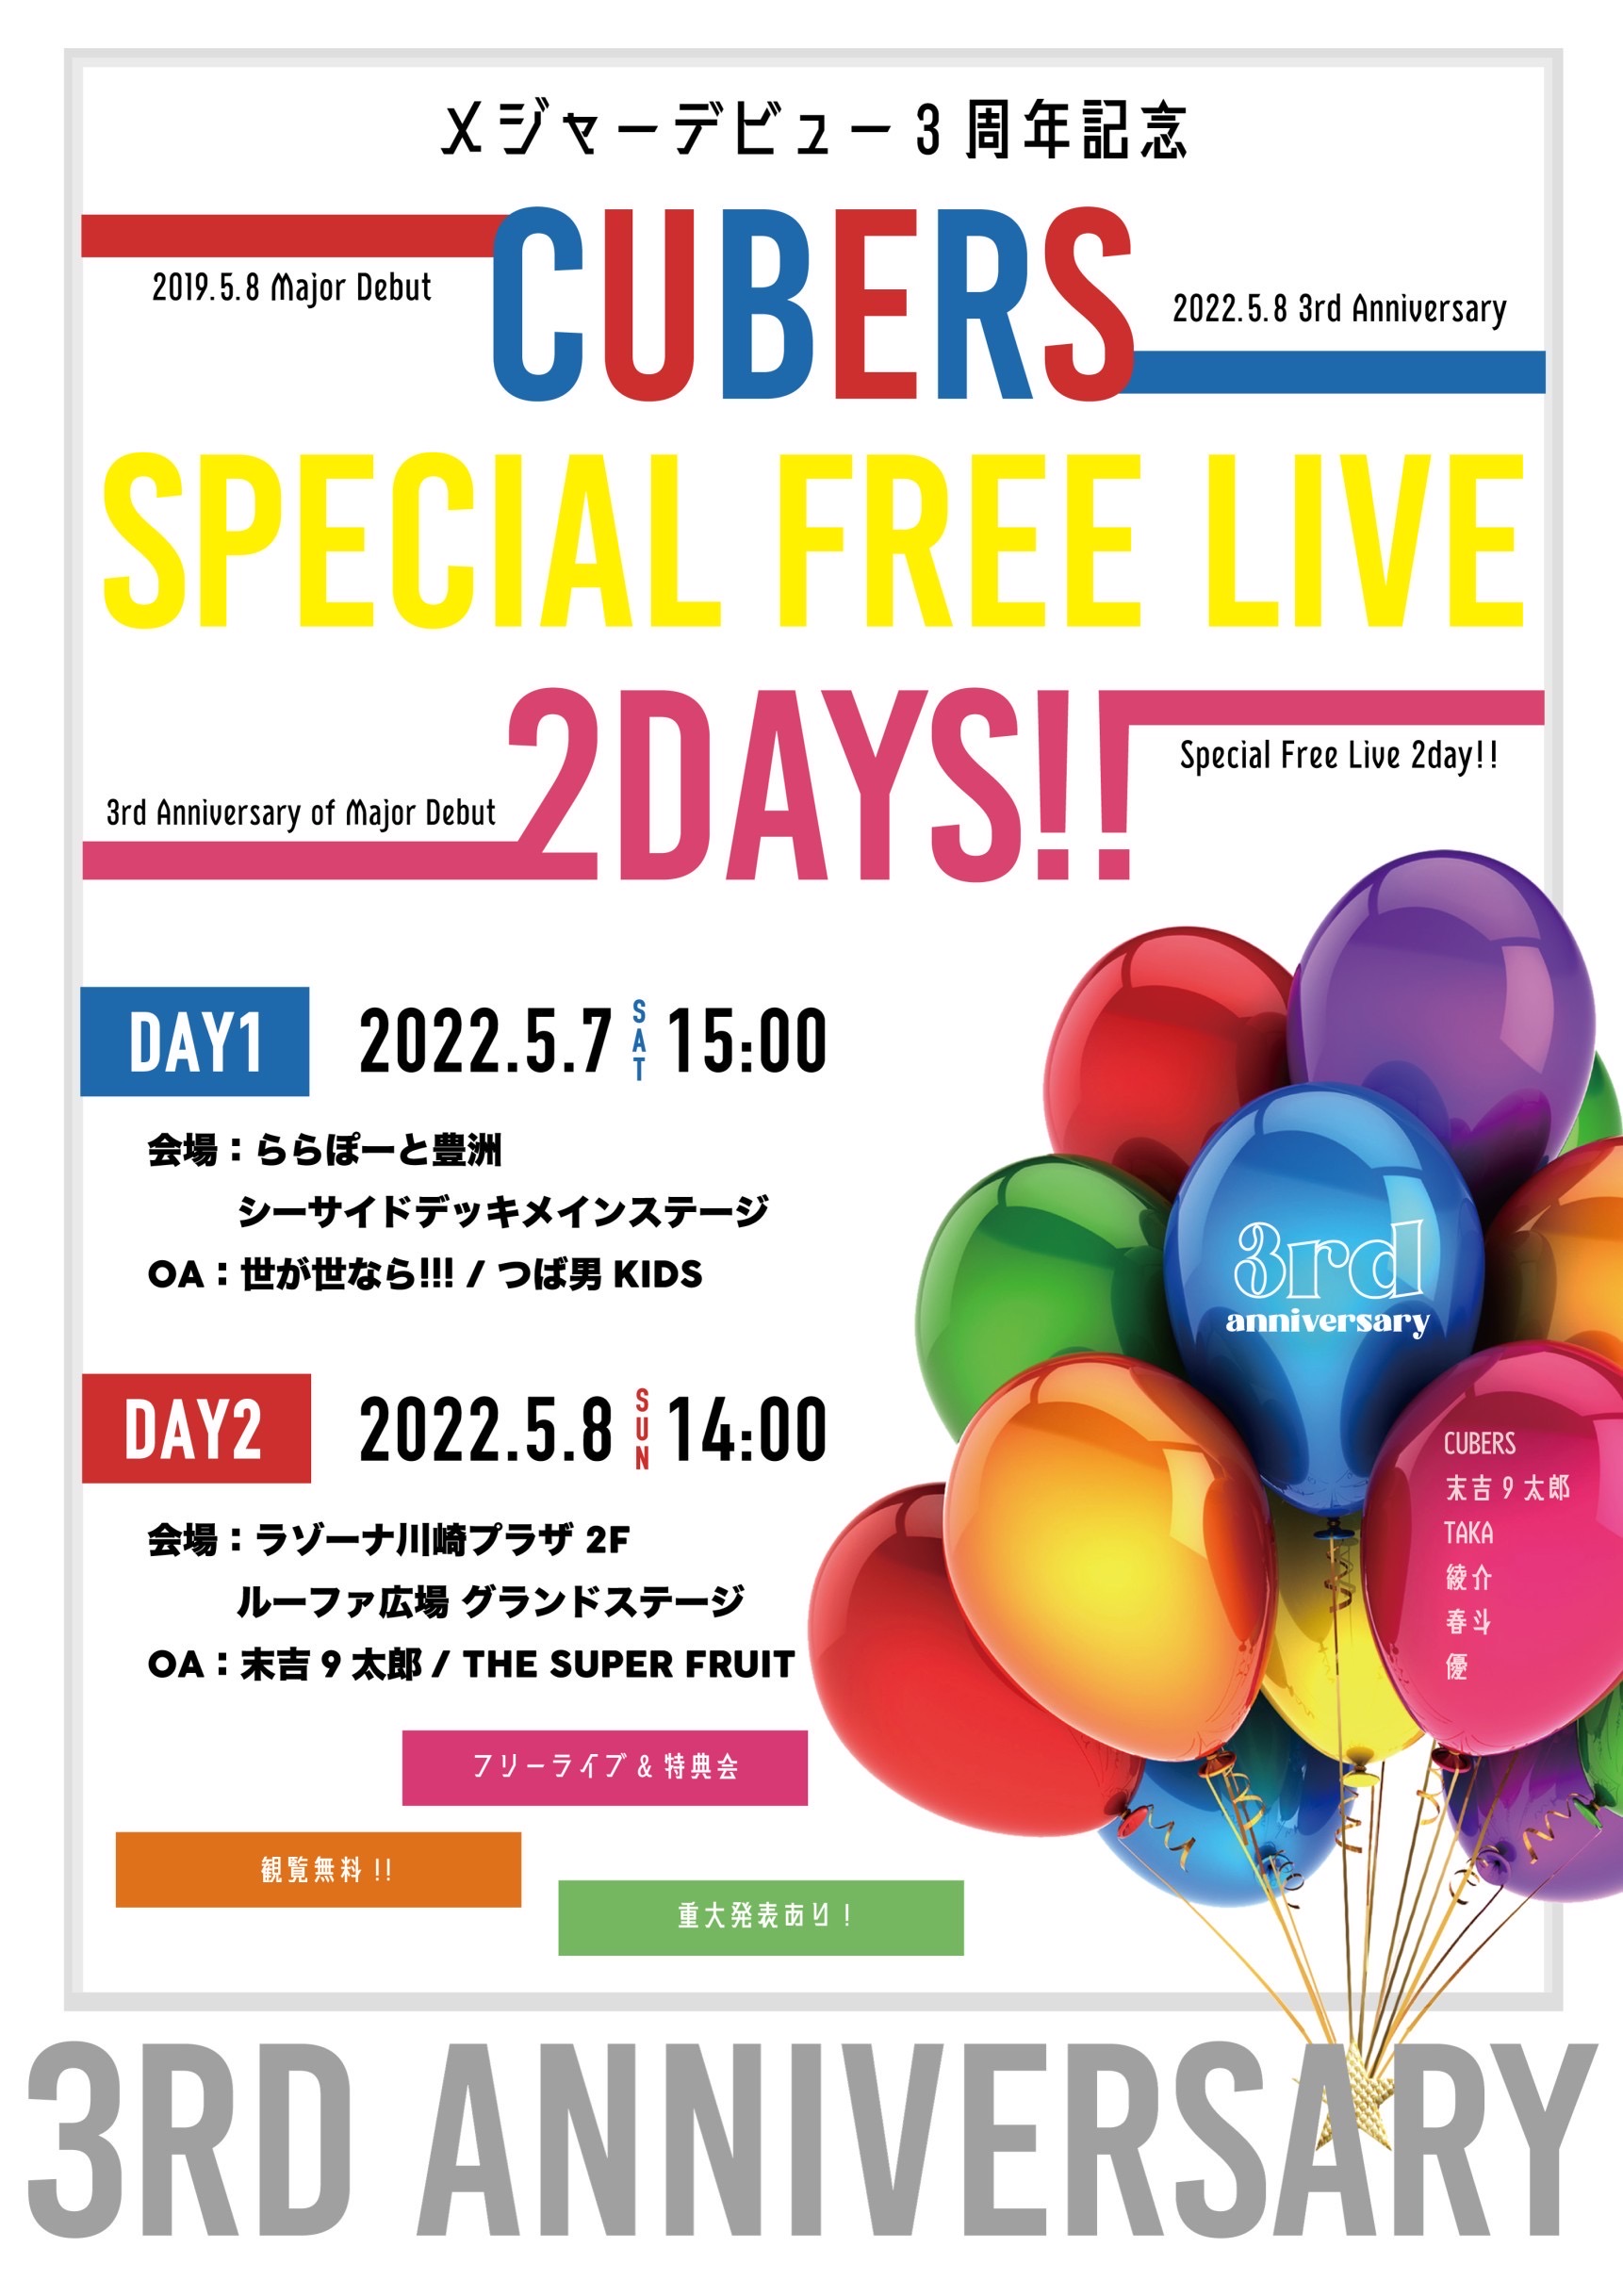 【NEWS】5月7日(土)・5月8日(日)に開催される「メジャーデビュー３周年記念 CUBERS SPECIAL FREE LIVE 2DAYS!!」DAY1への出演が決定！